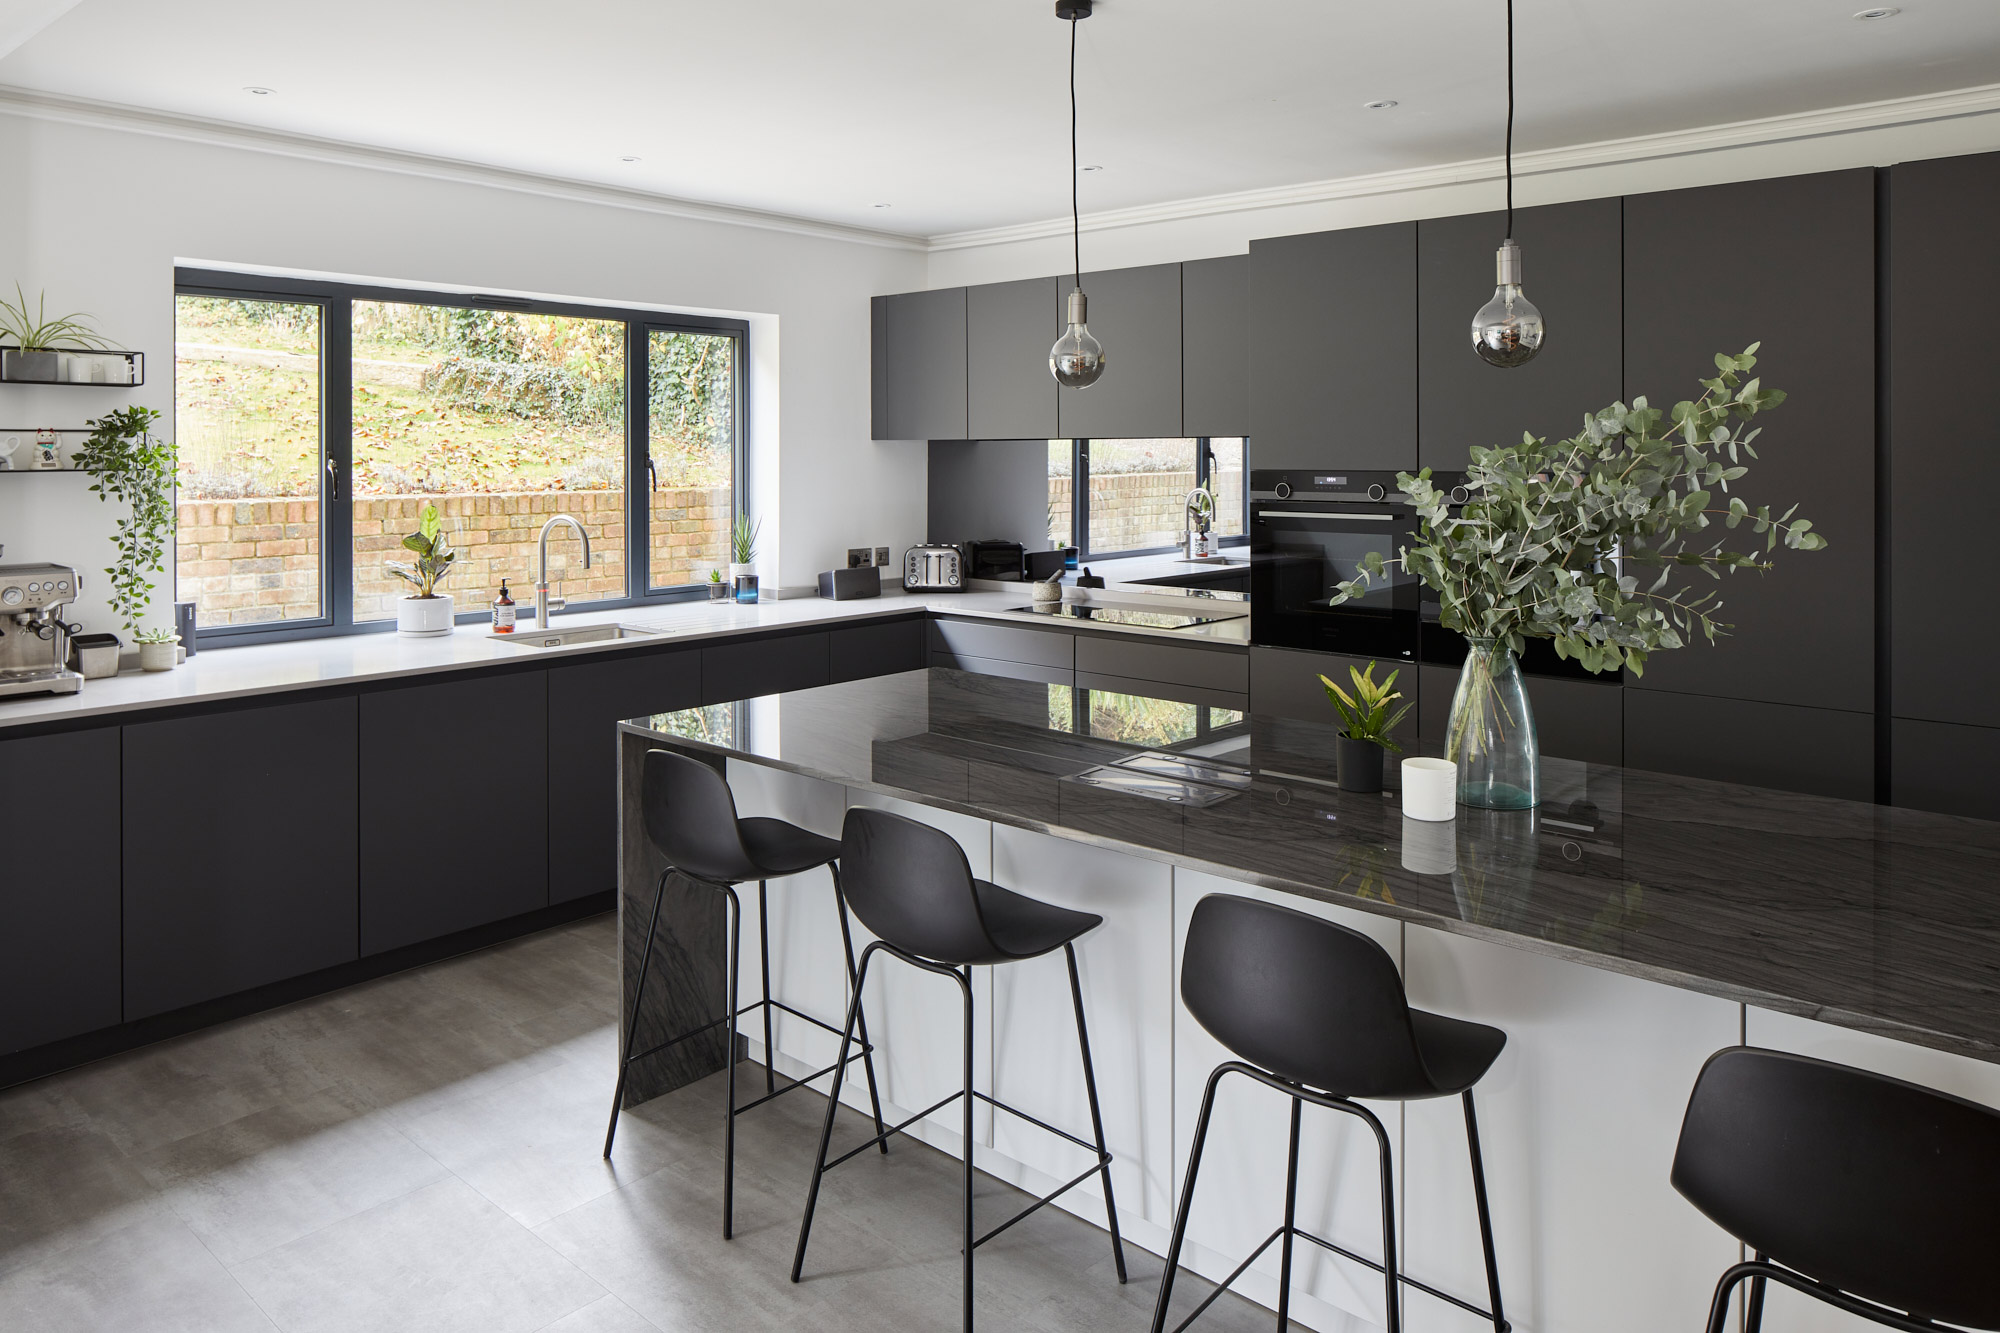 Image of kitchen Hayes silestone sensa cocina 9 in {{Luxury and functionality in an attractive open-plan kitchen in Hayes }} - Cosentino